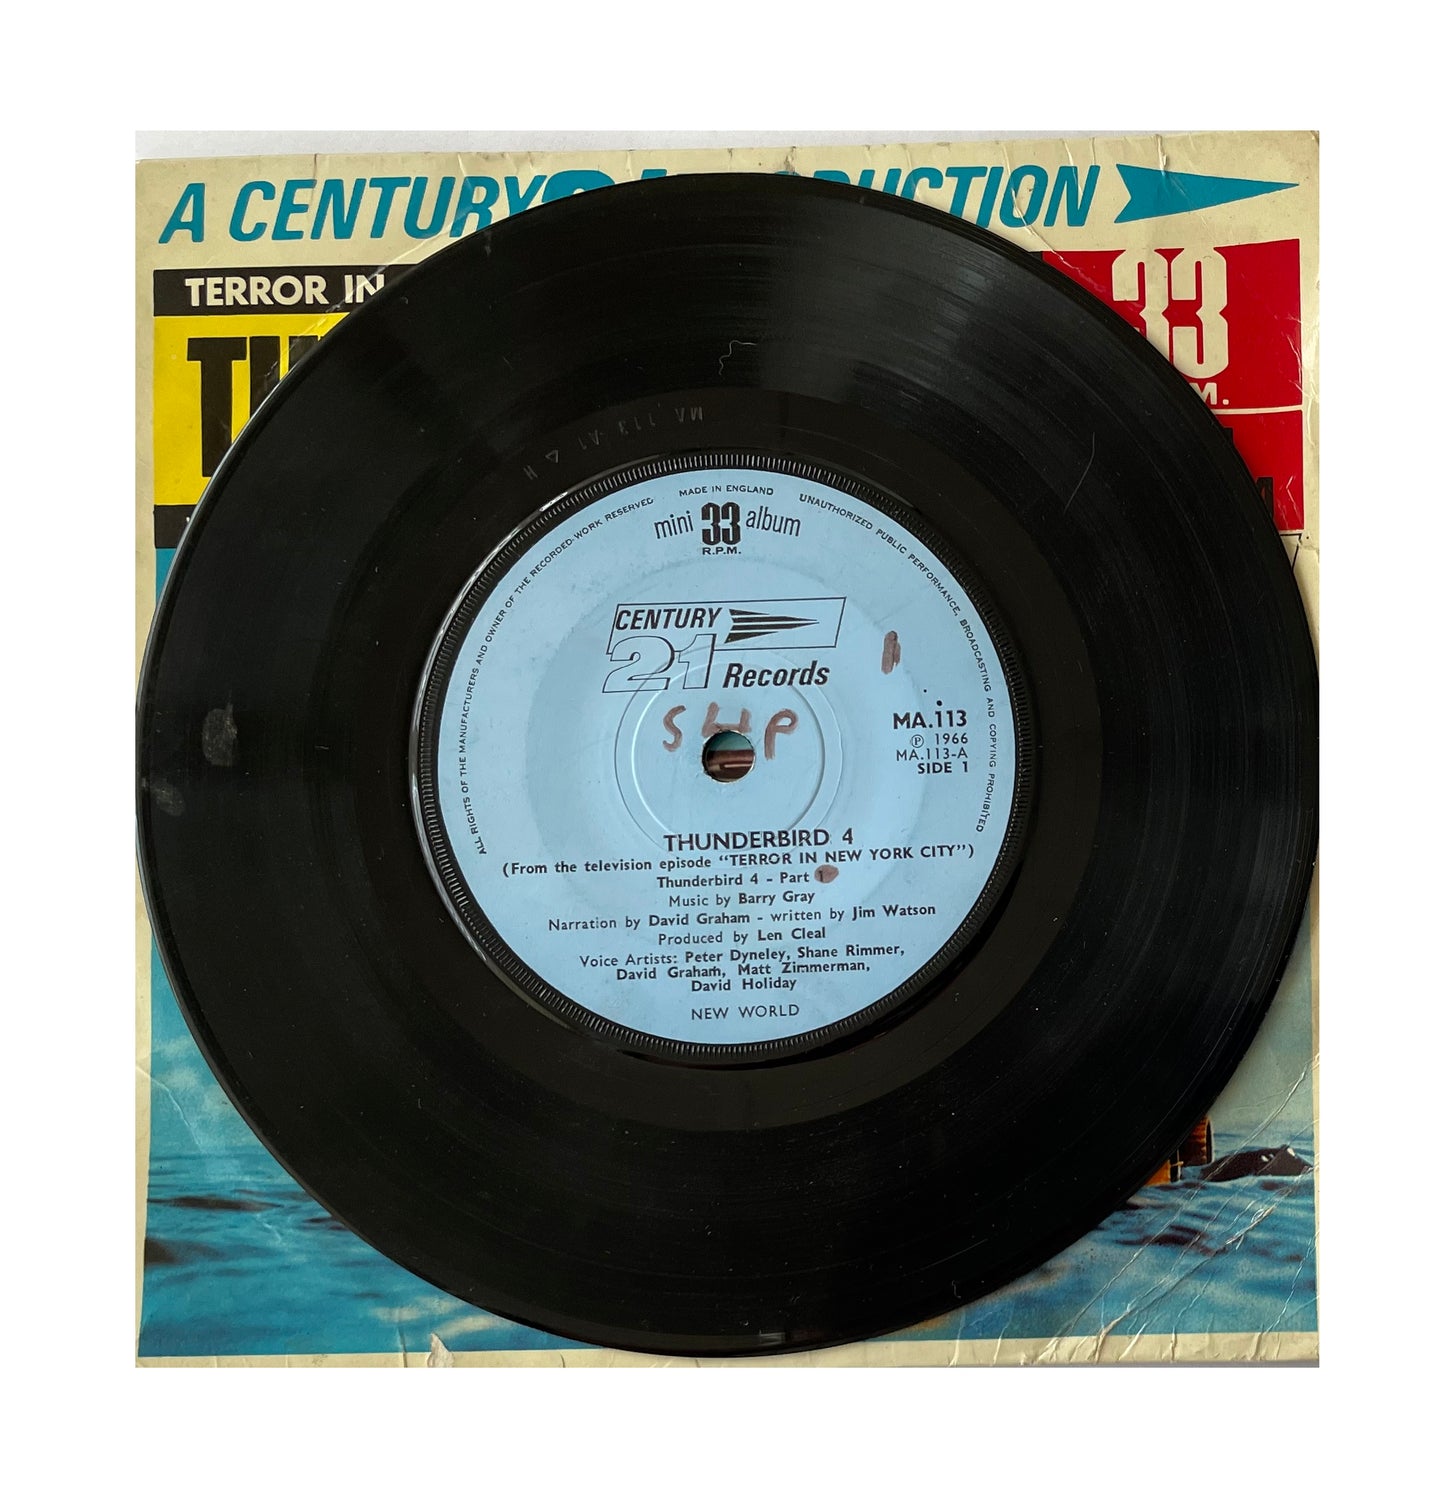 Vintage 1966 Gerry Andersons Thunderbirds A Century 21 Production - Terror In New York Featuring Thunderbird 4 With Pilot Gordon Tracy - 33RPM Mini Album - 21 Minutes Of Adventure Vinyl Record